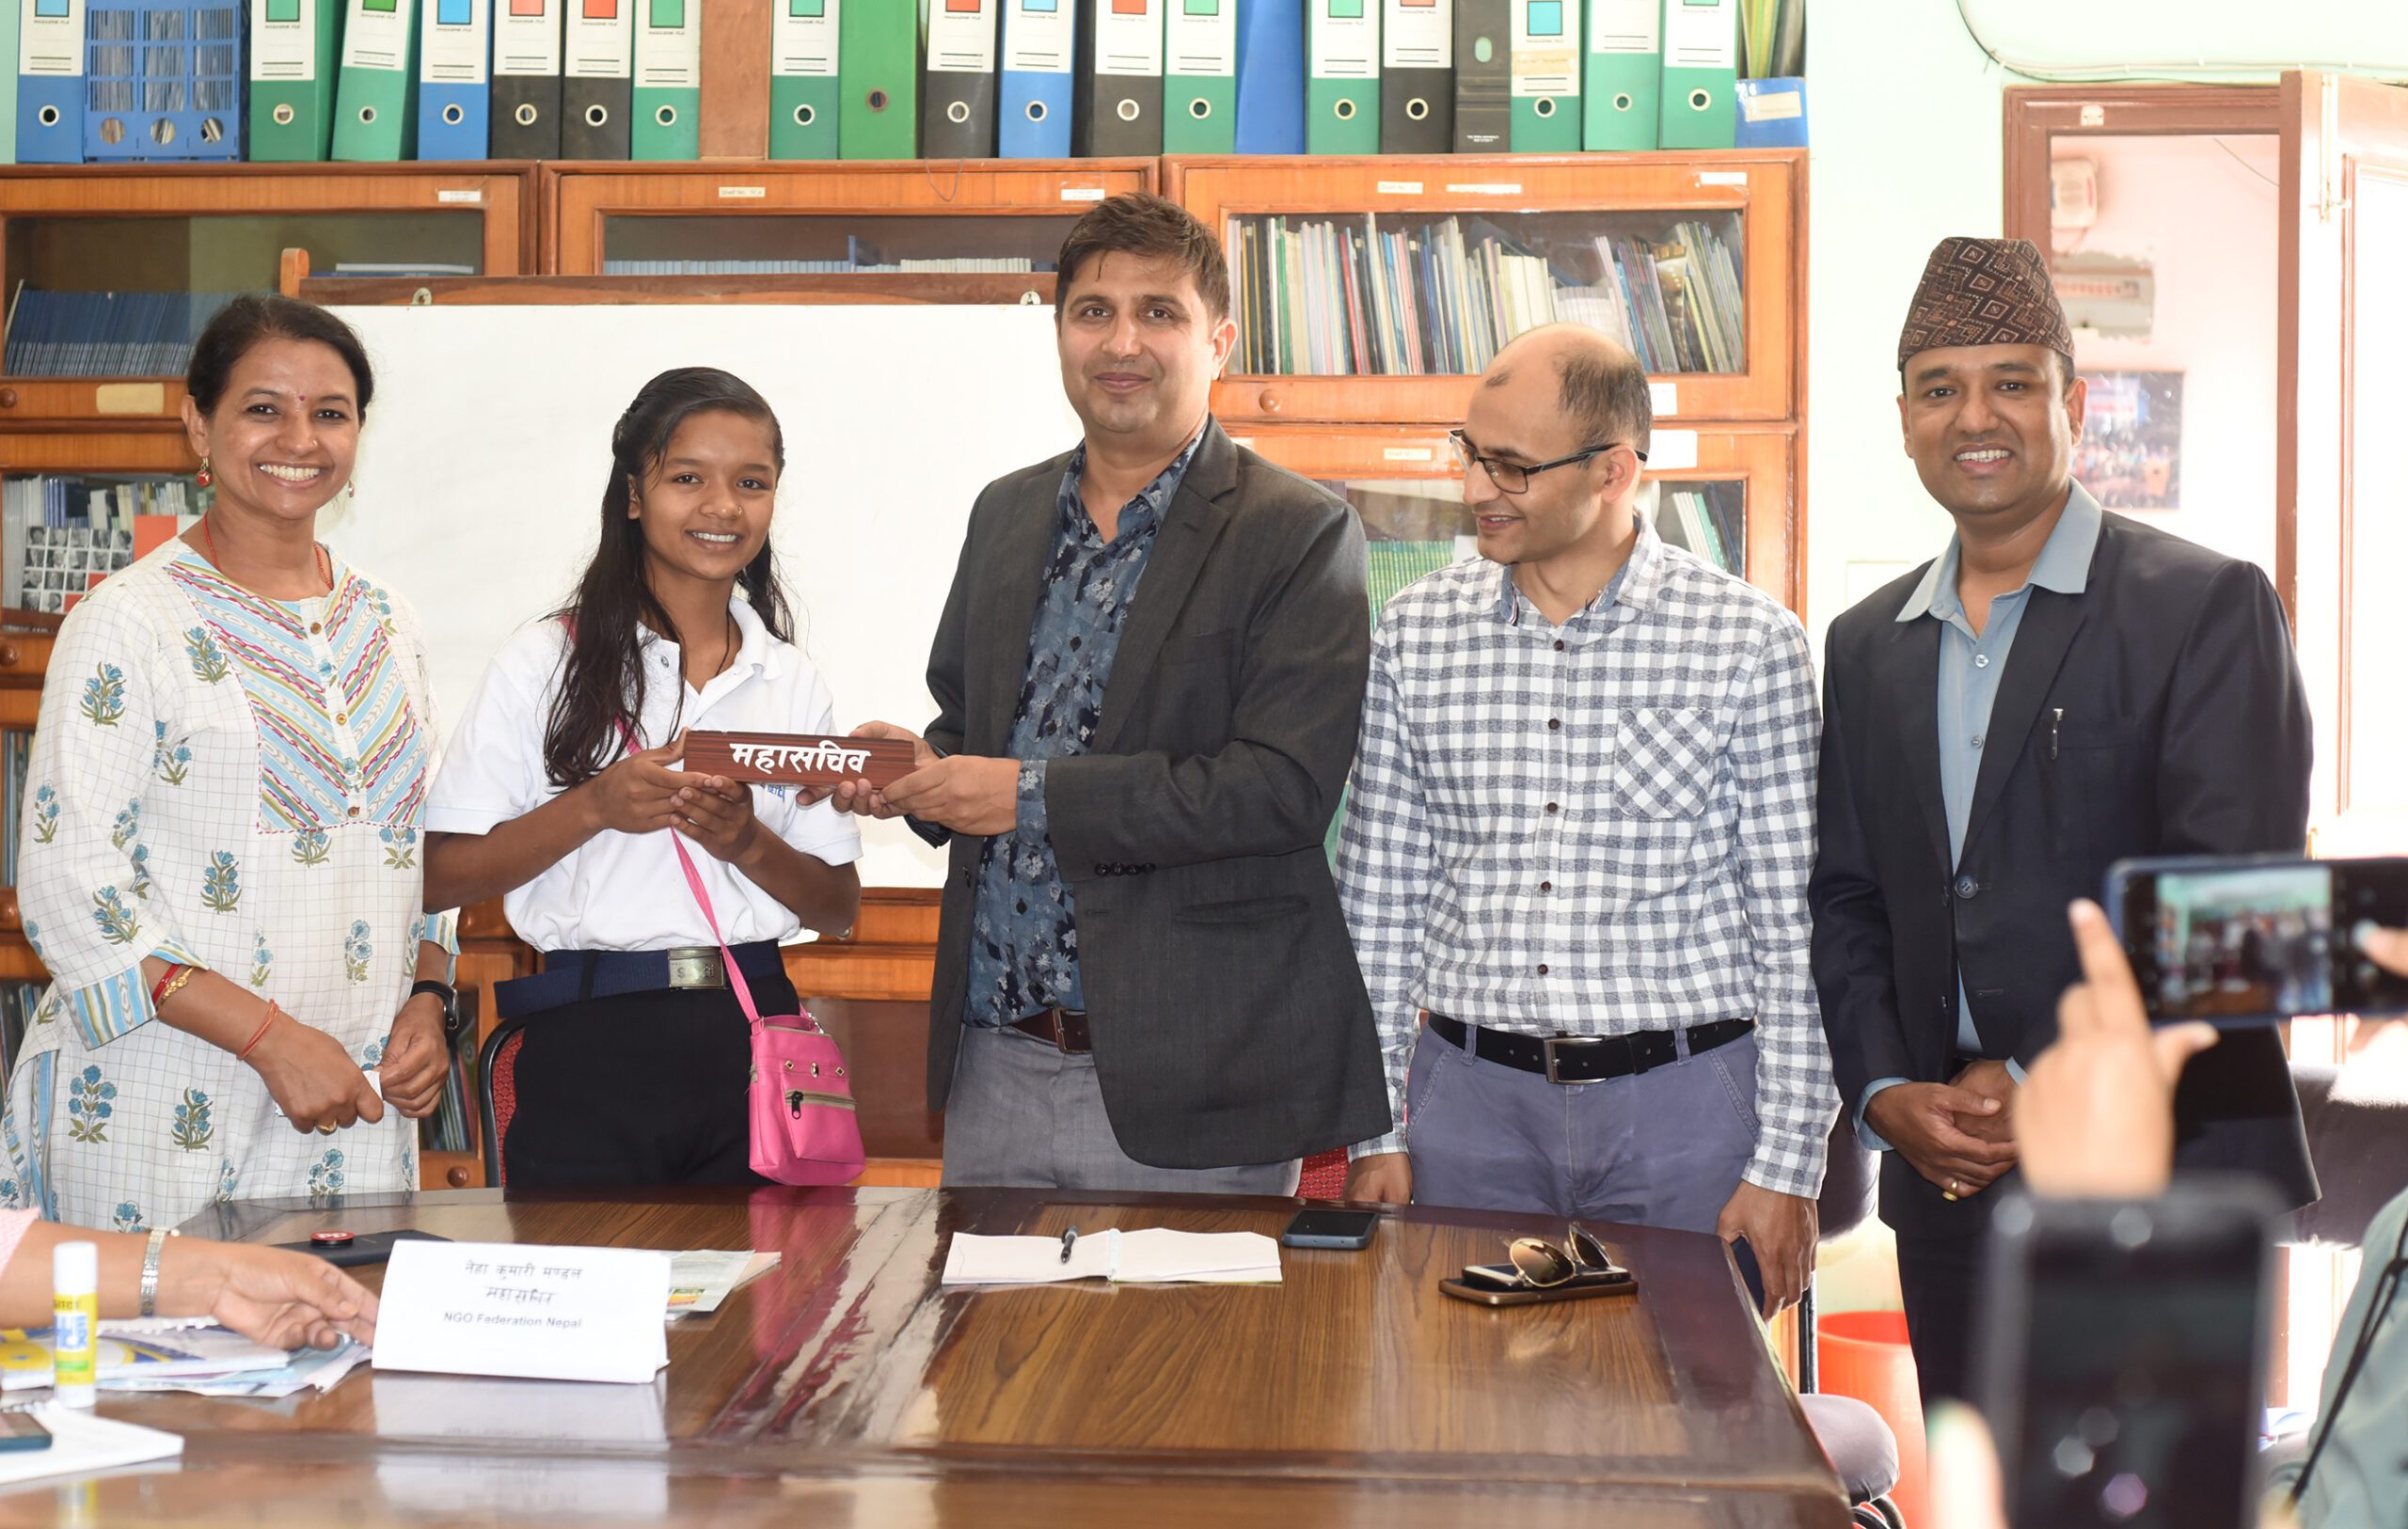 Secretary-General of NGO Federation is handing over his position to Neha for #GirlsTakeover.